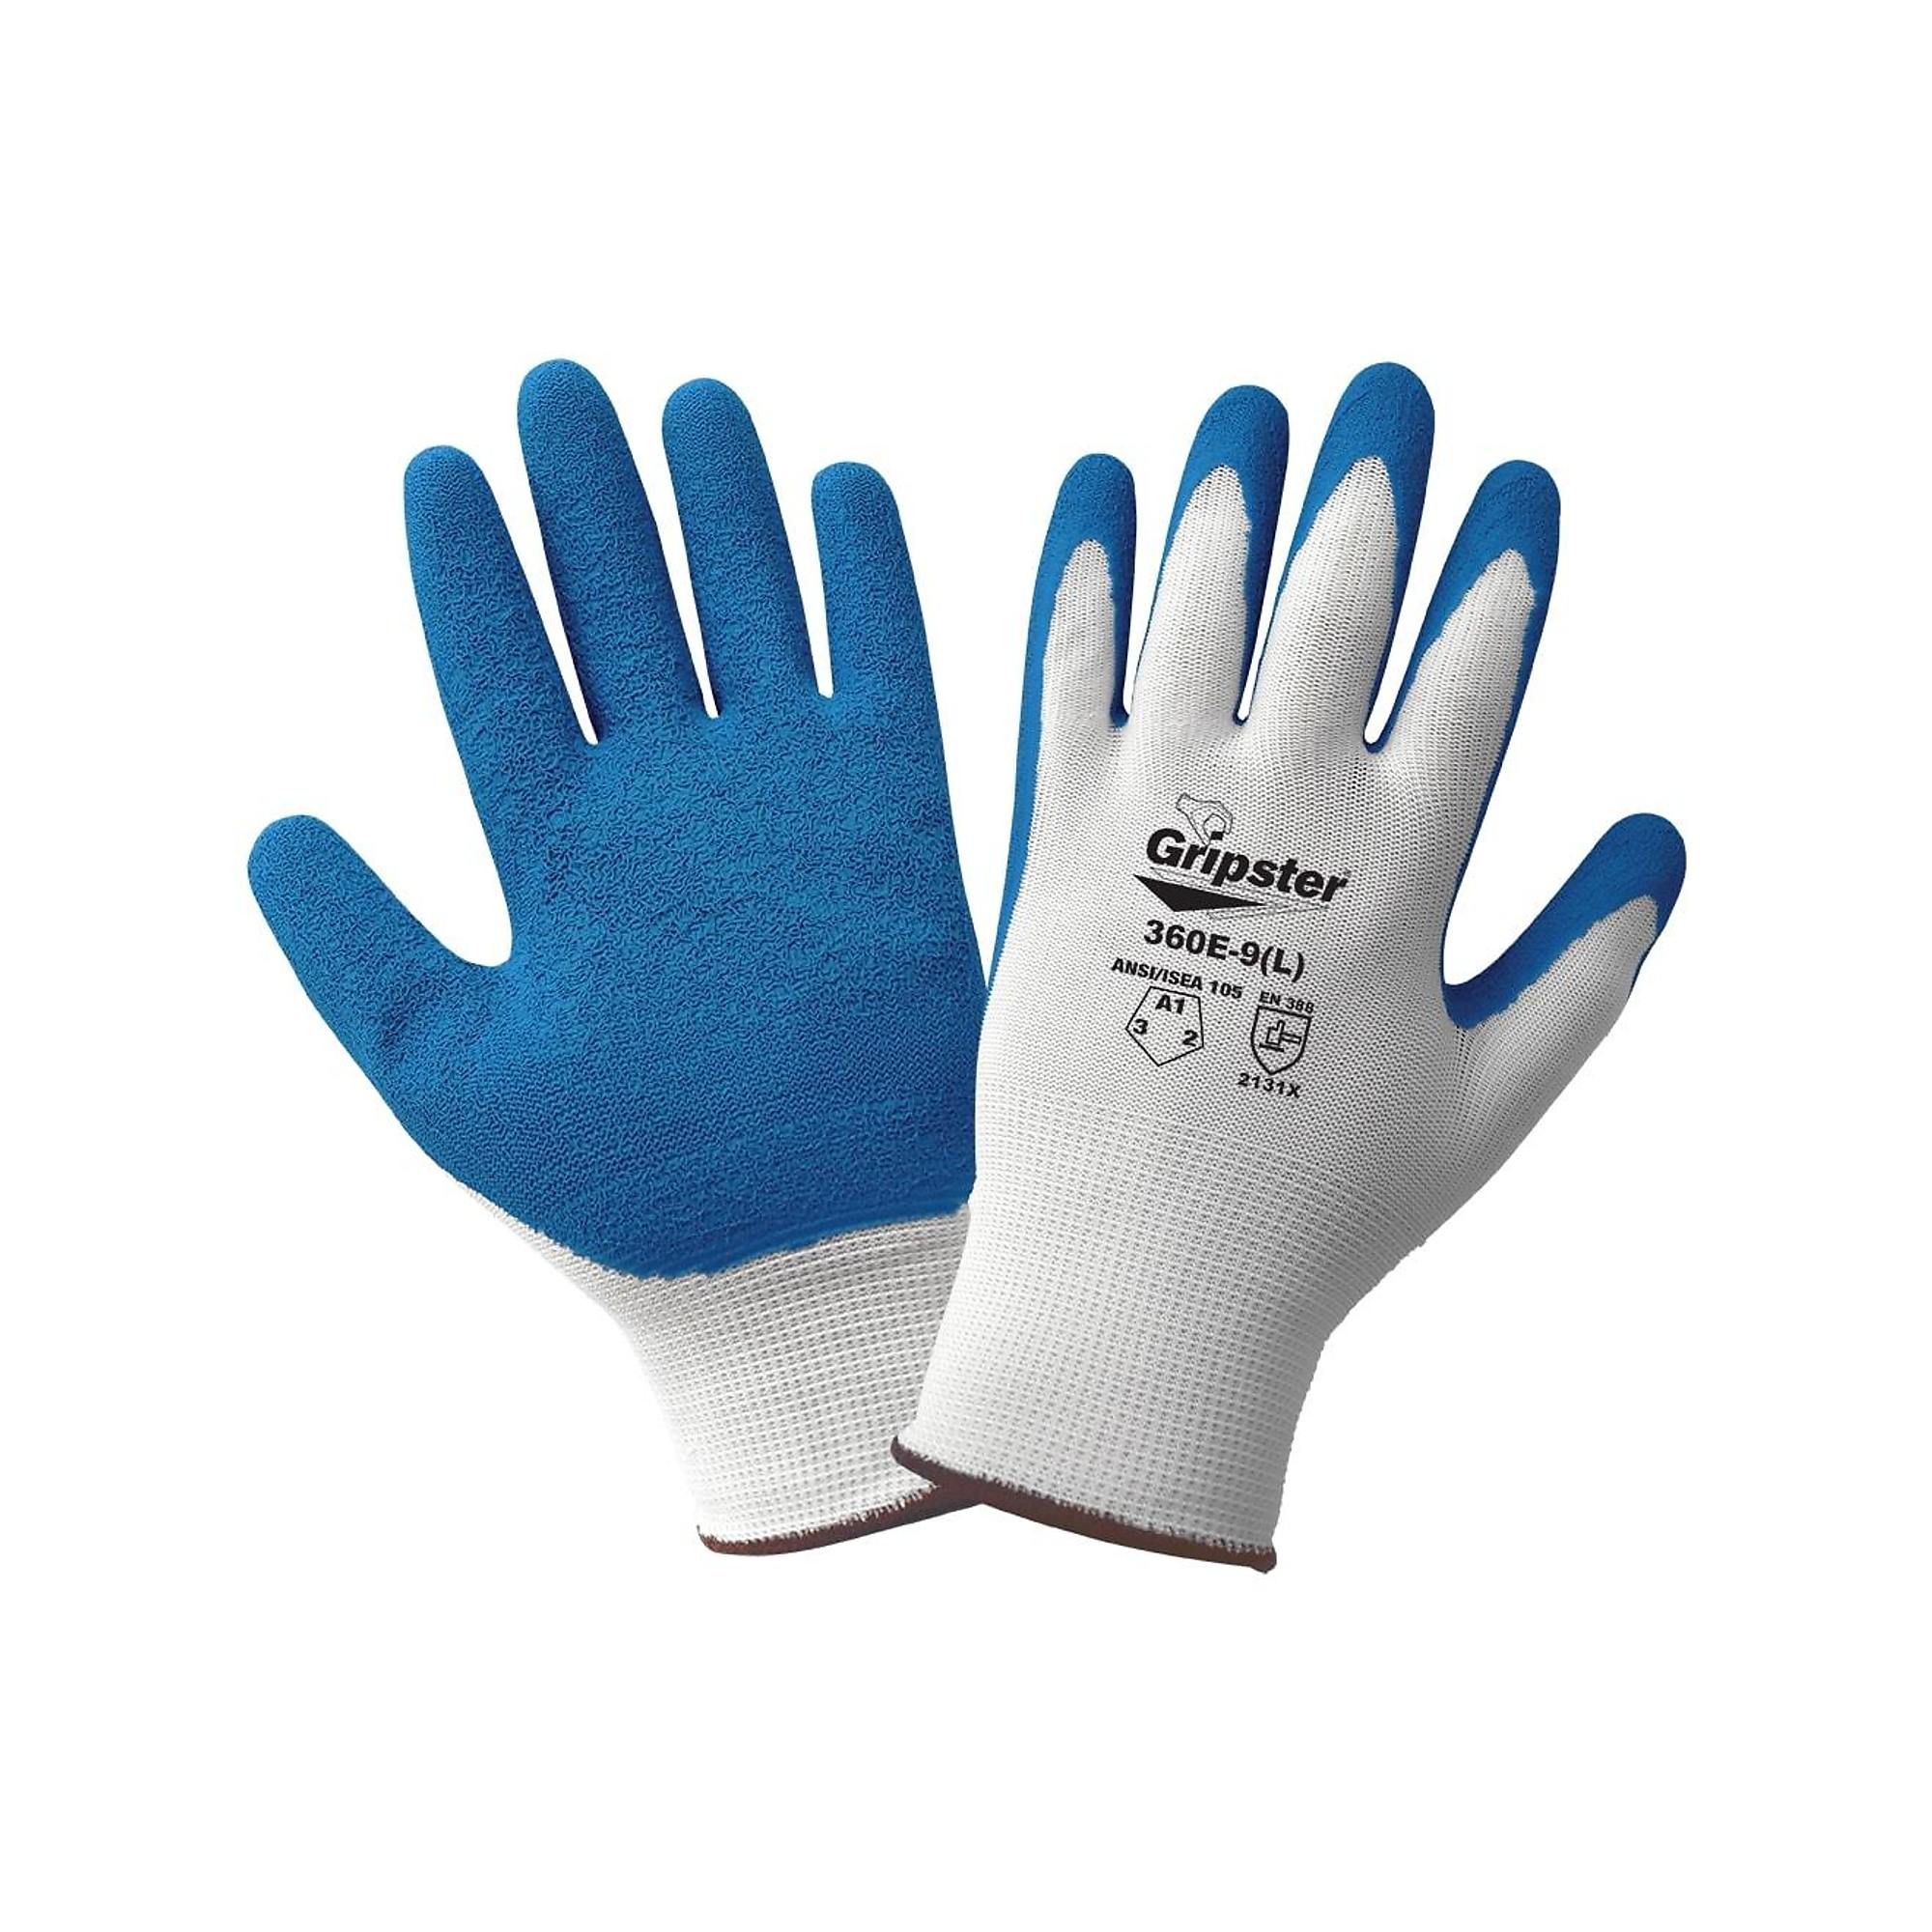 Global Glove Gripster , White, Blue Rub Coated, Cut Resistant A1 Gloves - 12 Pairs, Size M, Color White/Blue, Included (qty.) 12 Model 360E-8(M)